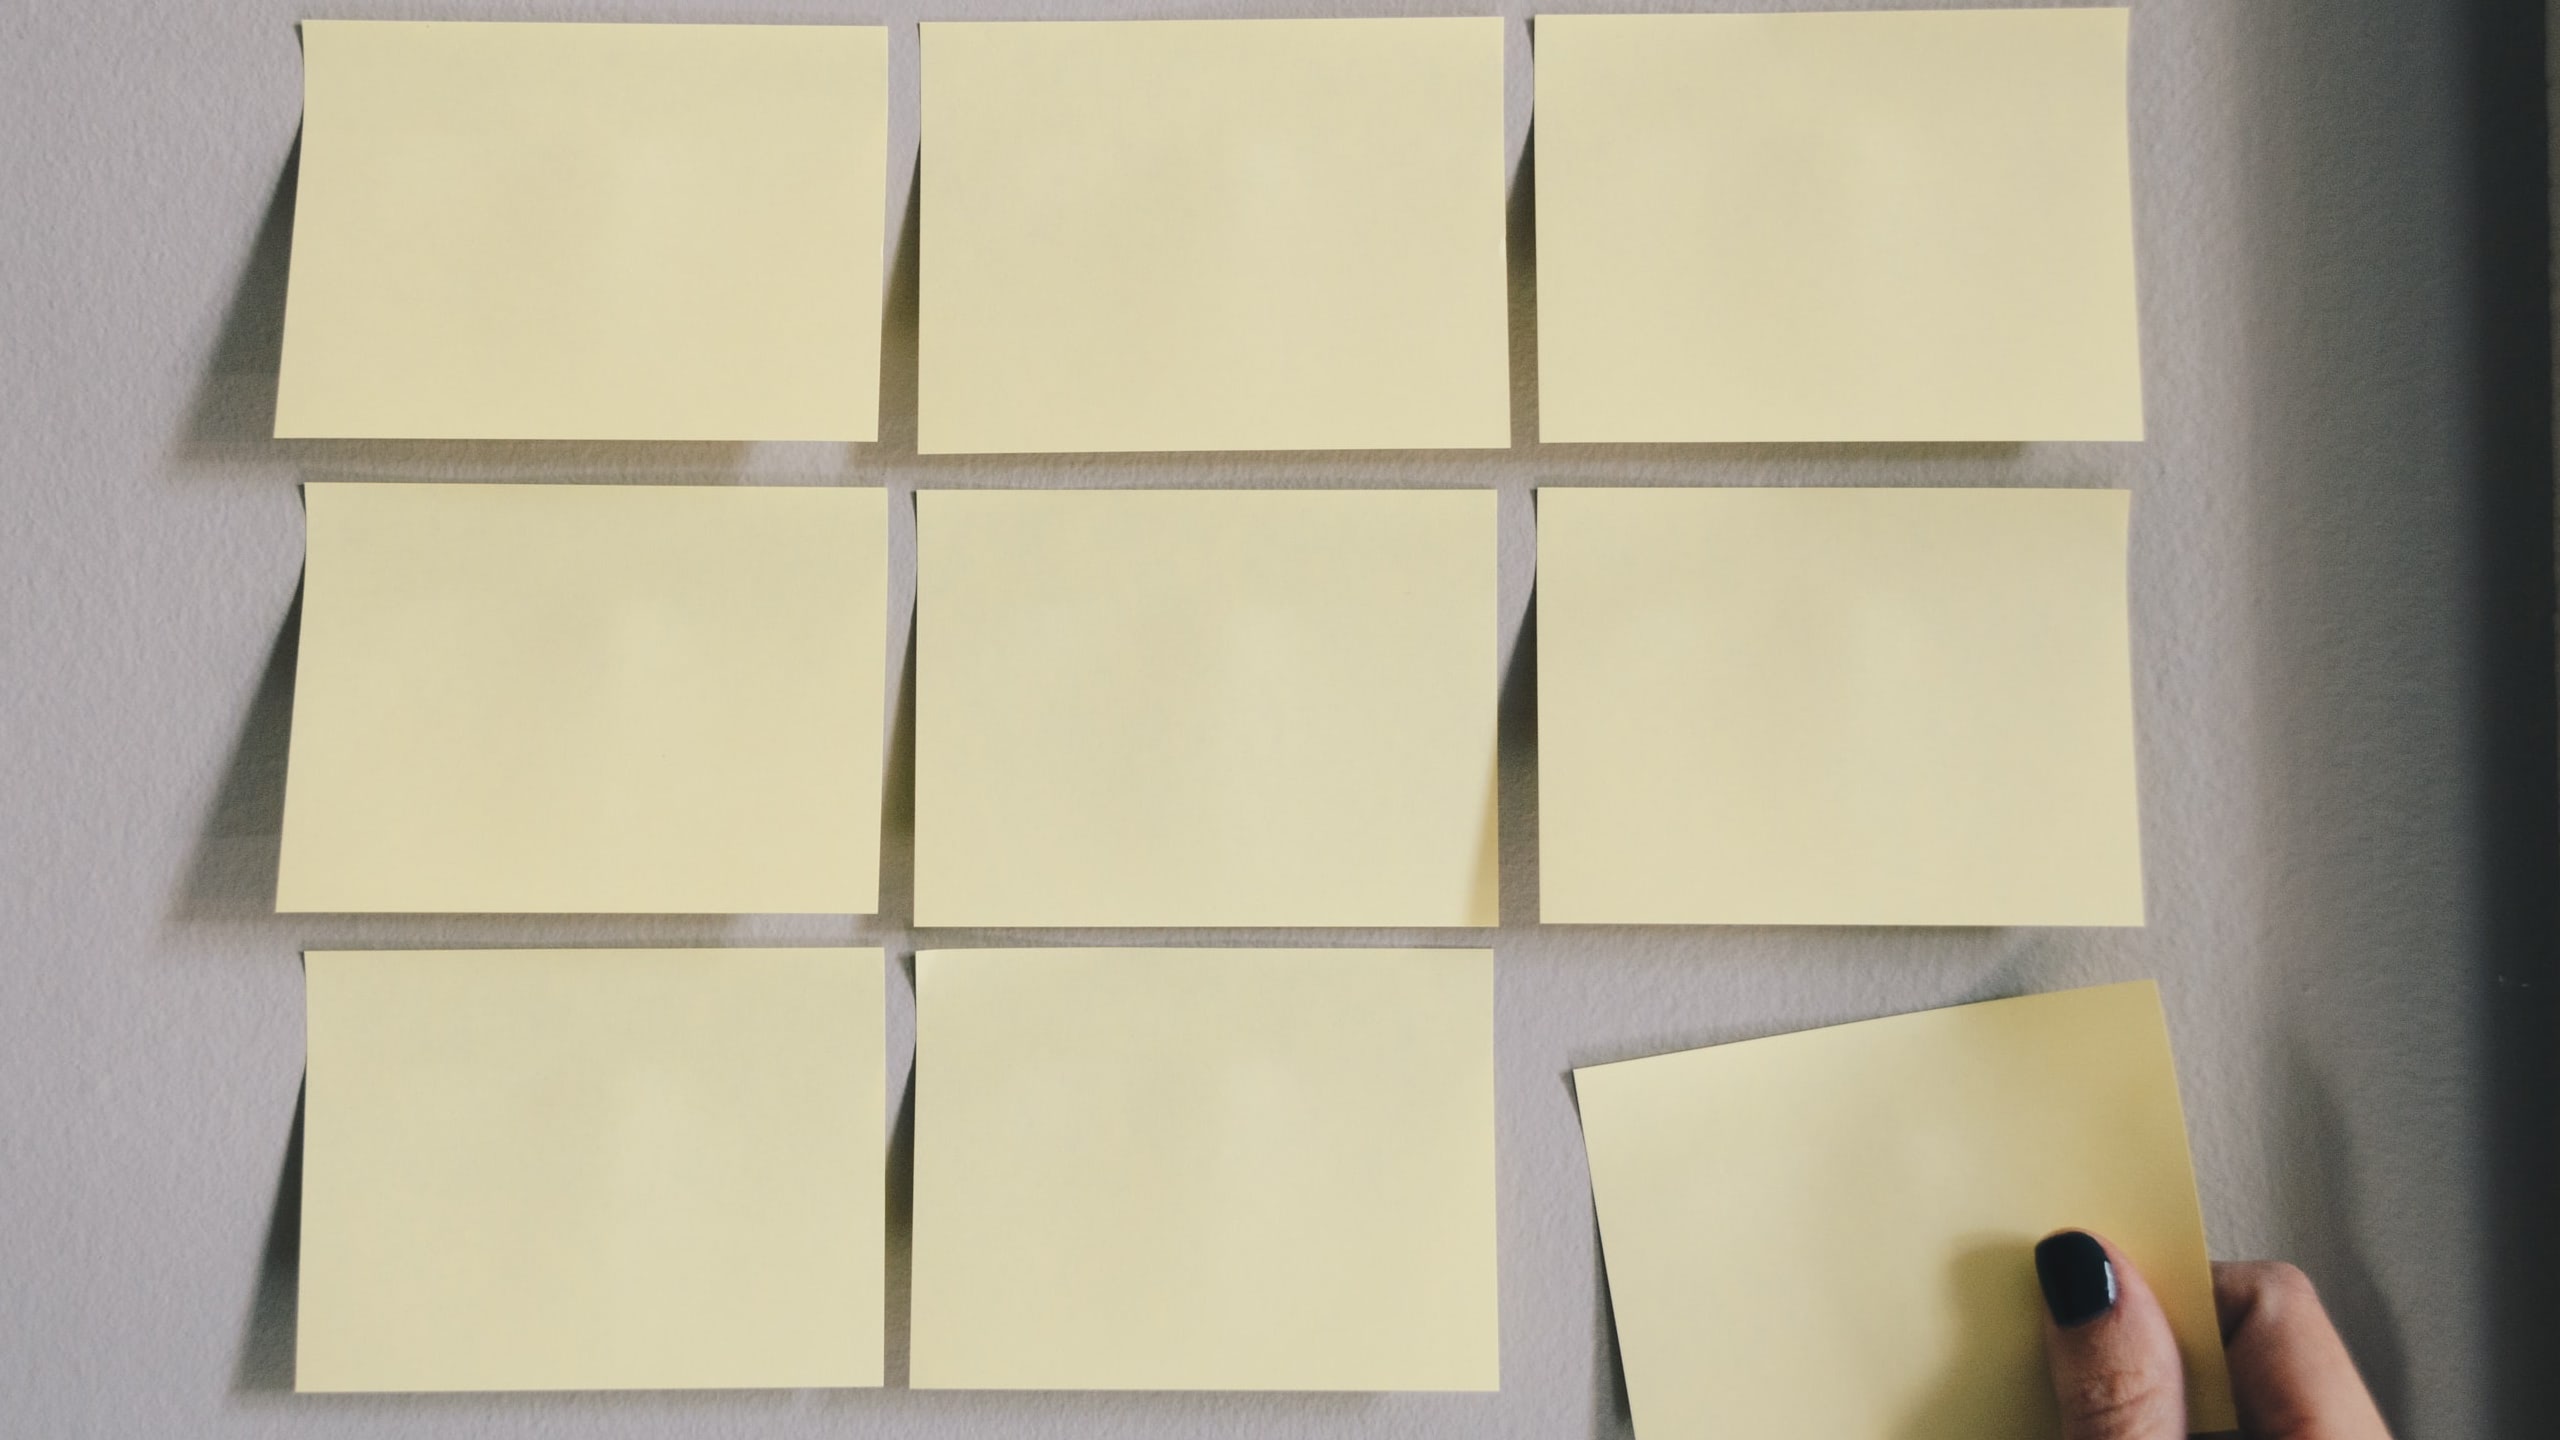 Blank Post-It notes affixed to a wall. A hand is taking one of them off